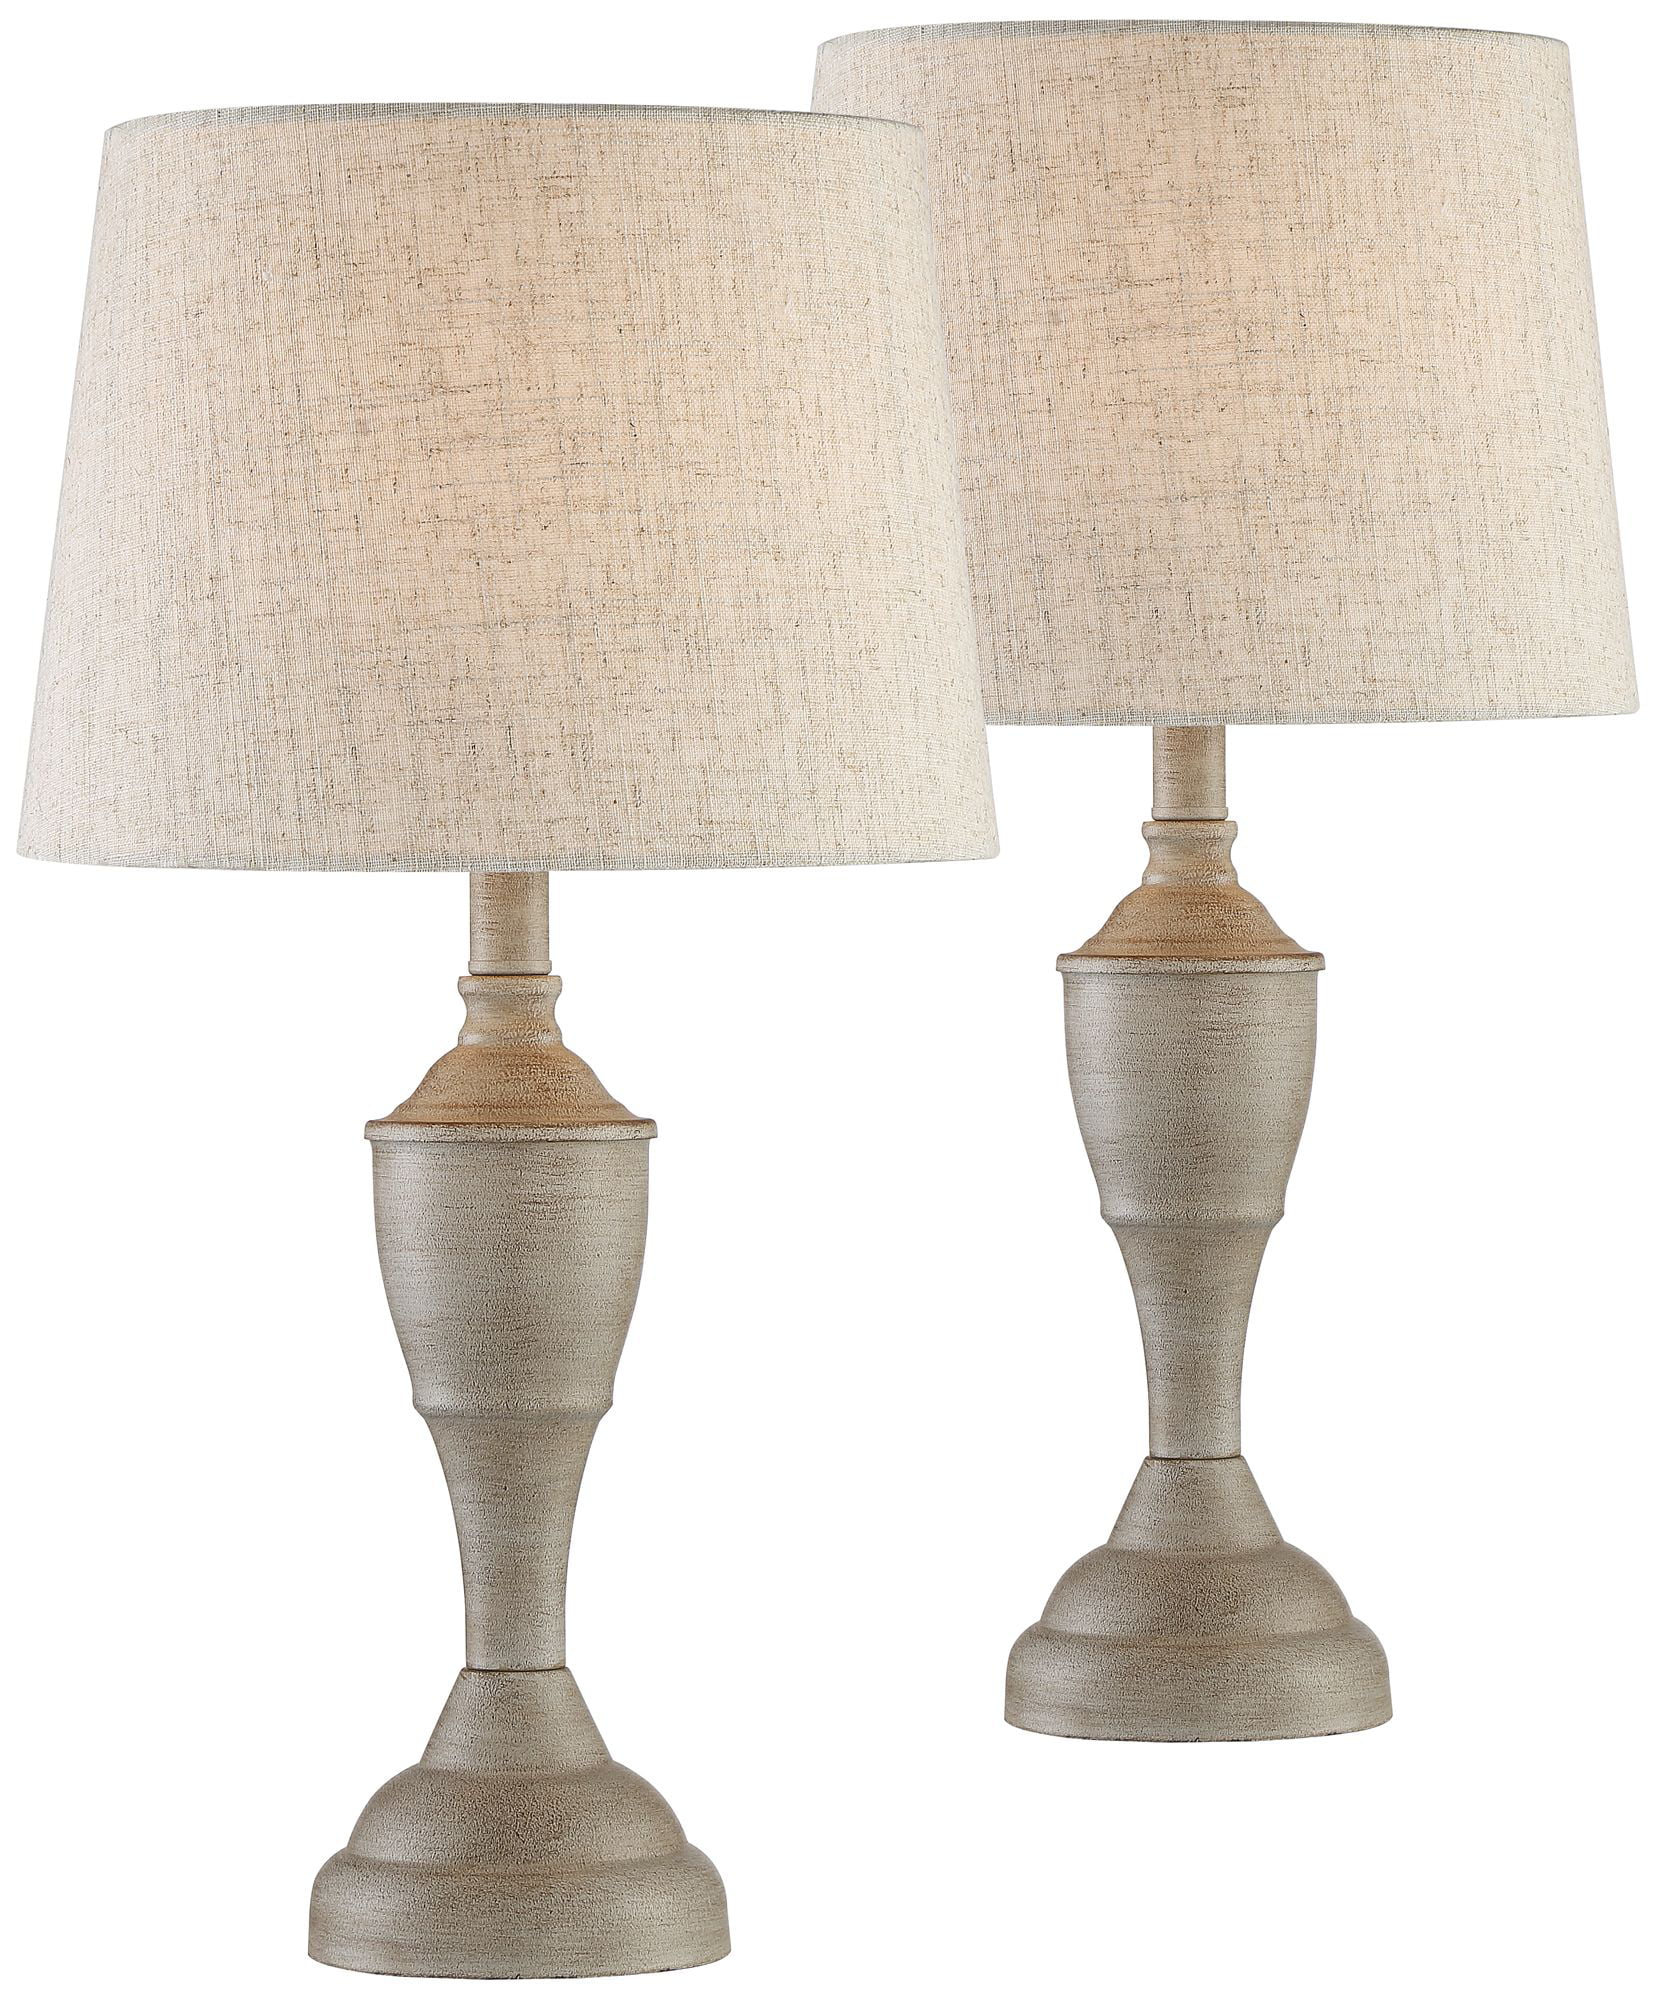 360 Lighting Farmhouse Chic Accent Table Lamps Set of 2 Beige Washed